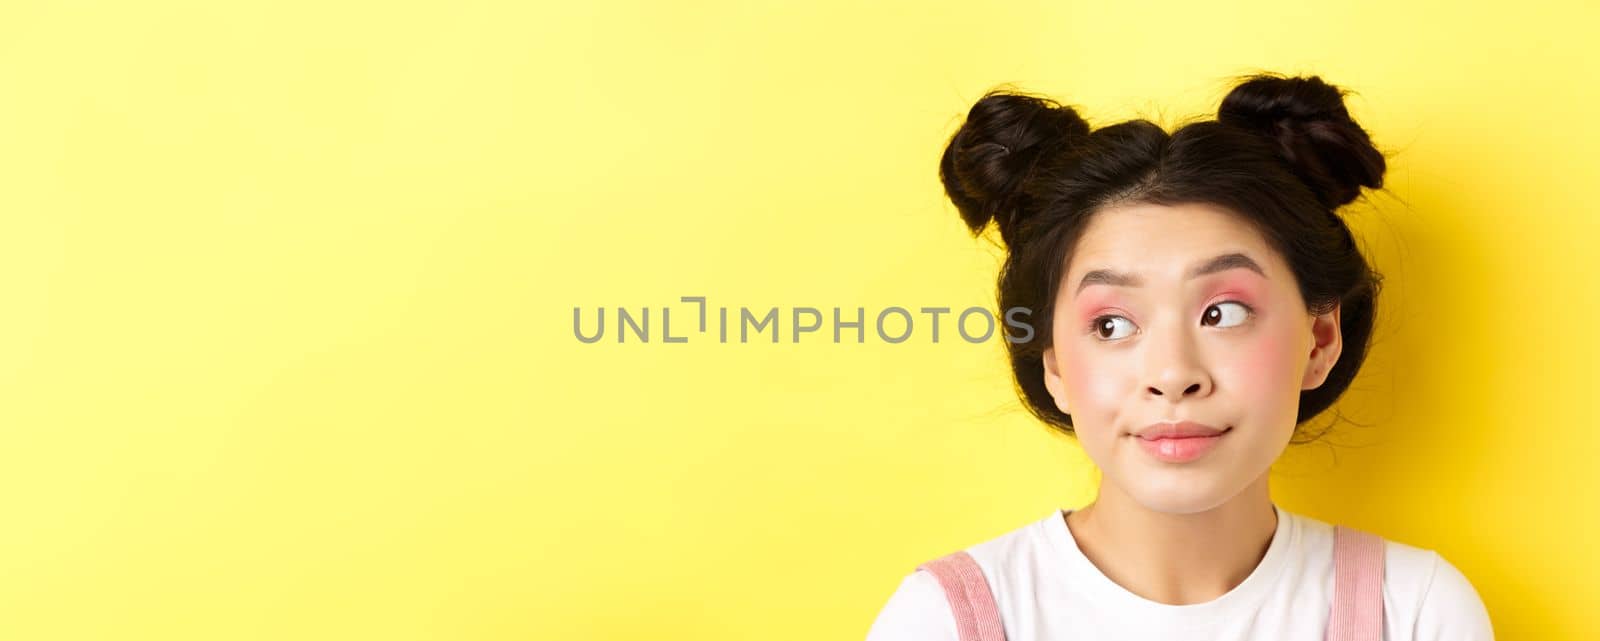 Close-up portrait of cute glamour asian girl, bright makeup and hairstyle, looking aside at logo with silly face, yellow background.